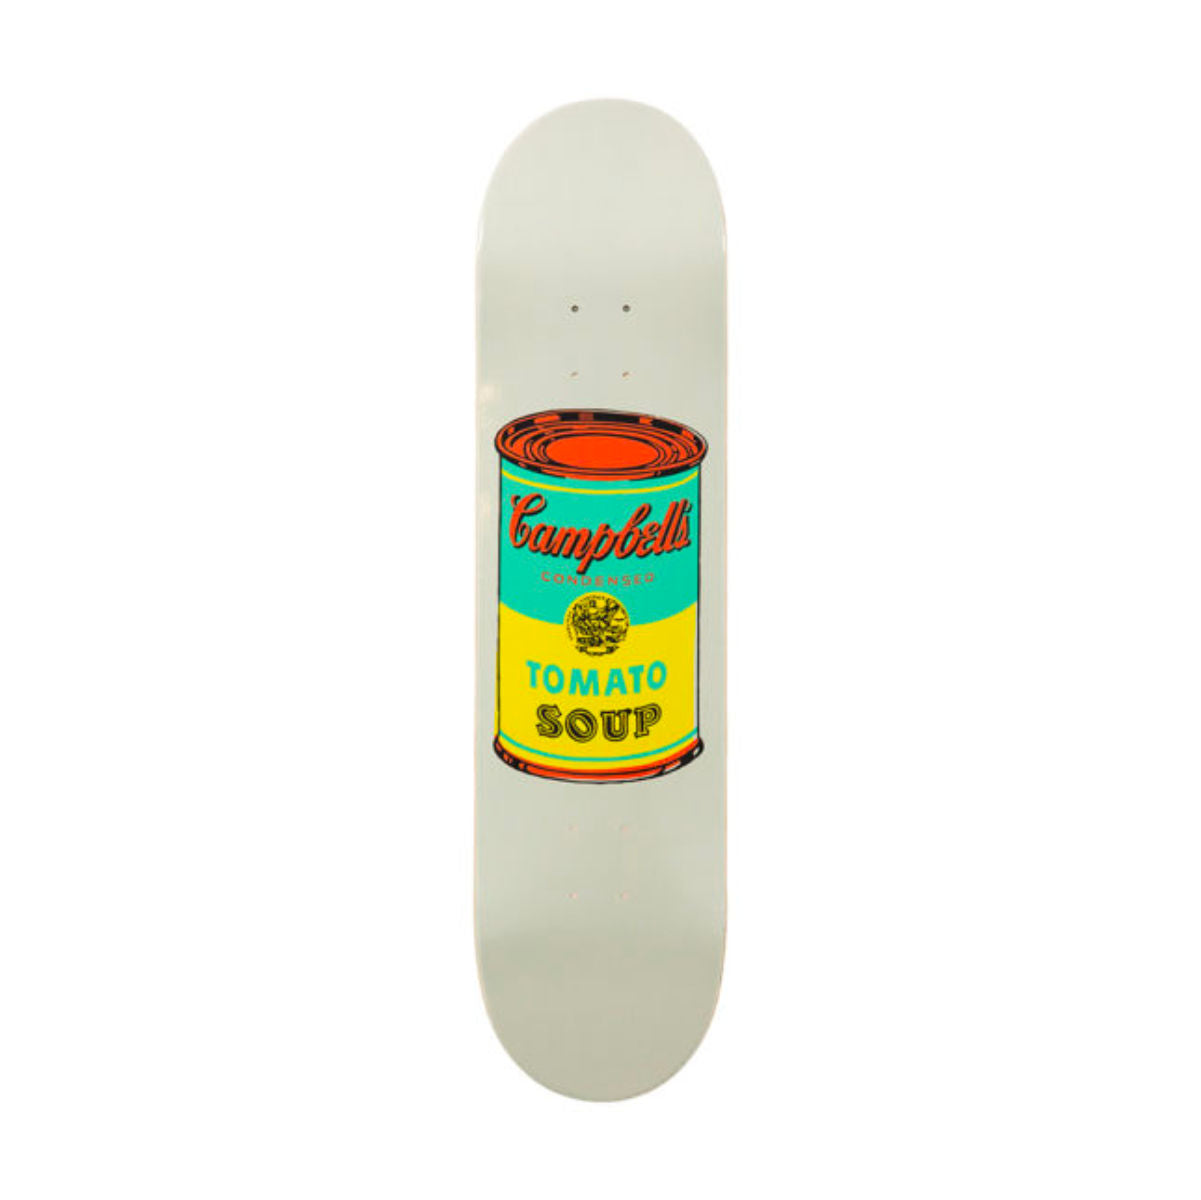 The Skateroom skateboard, Andy Warhol Colored Campbell's Soup yellow